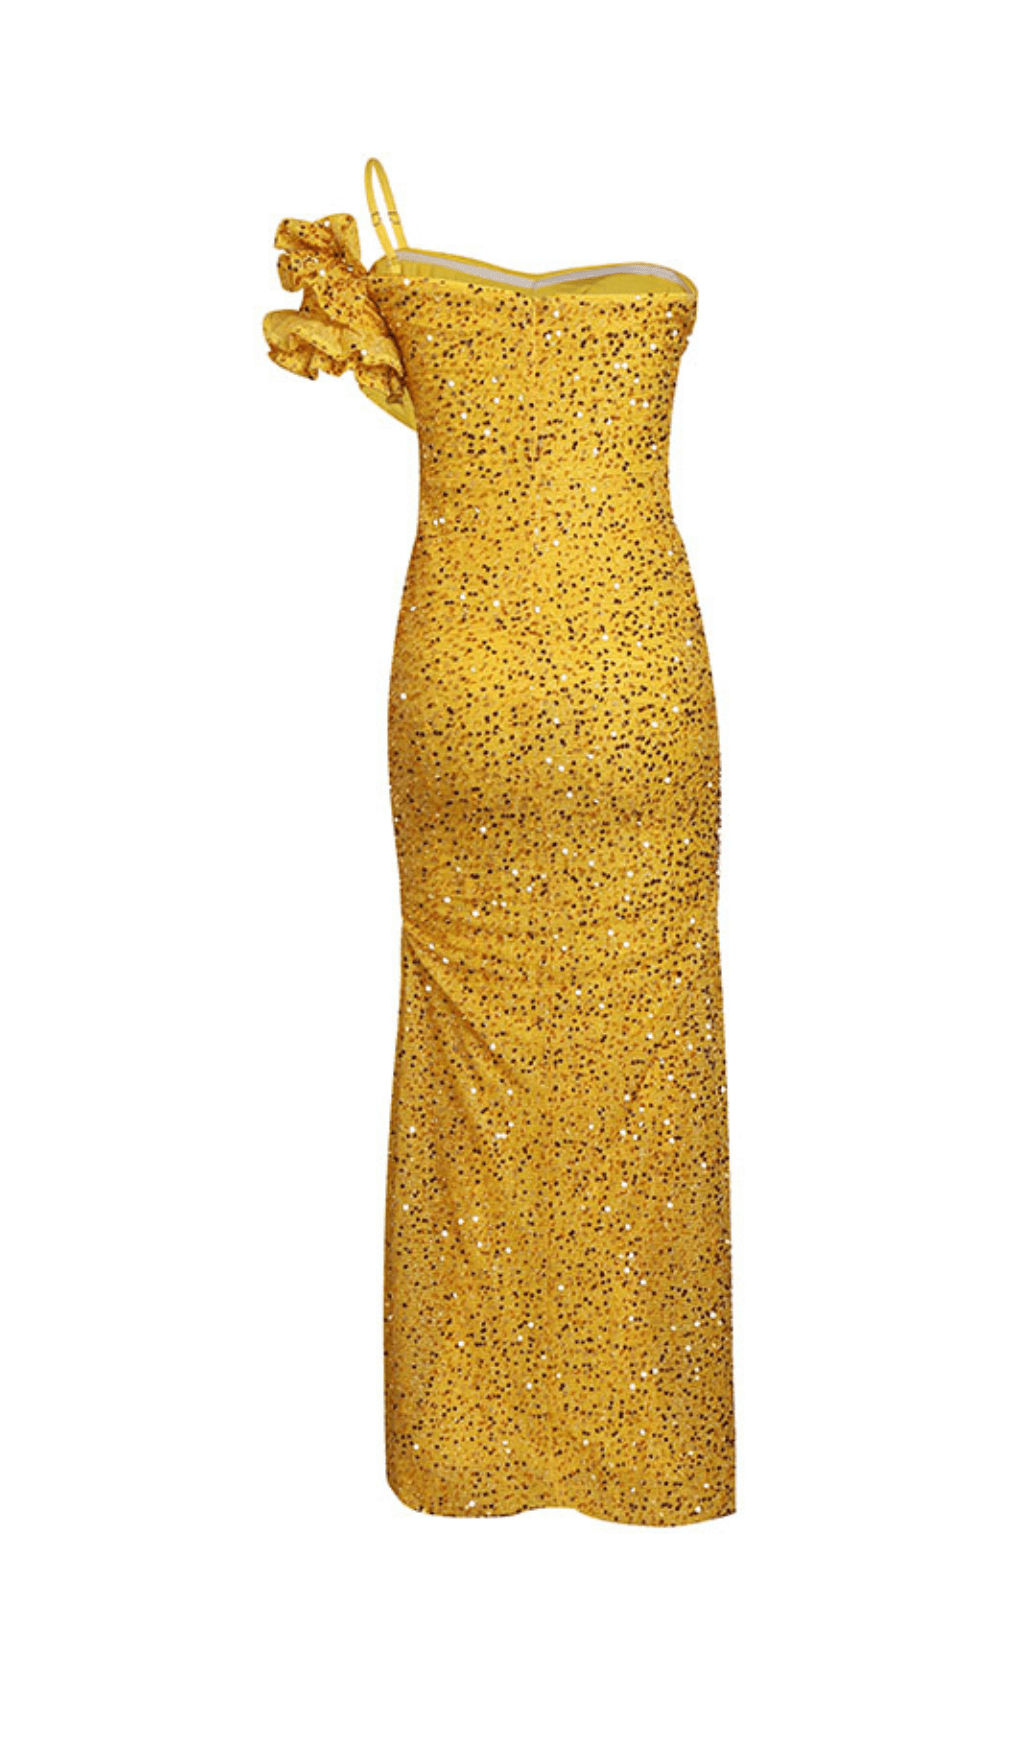 YELLOW ONE SHOULDER SEQUINED SLIT MAXI DRESS